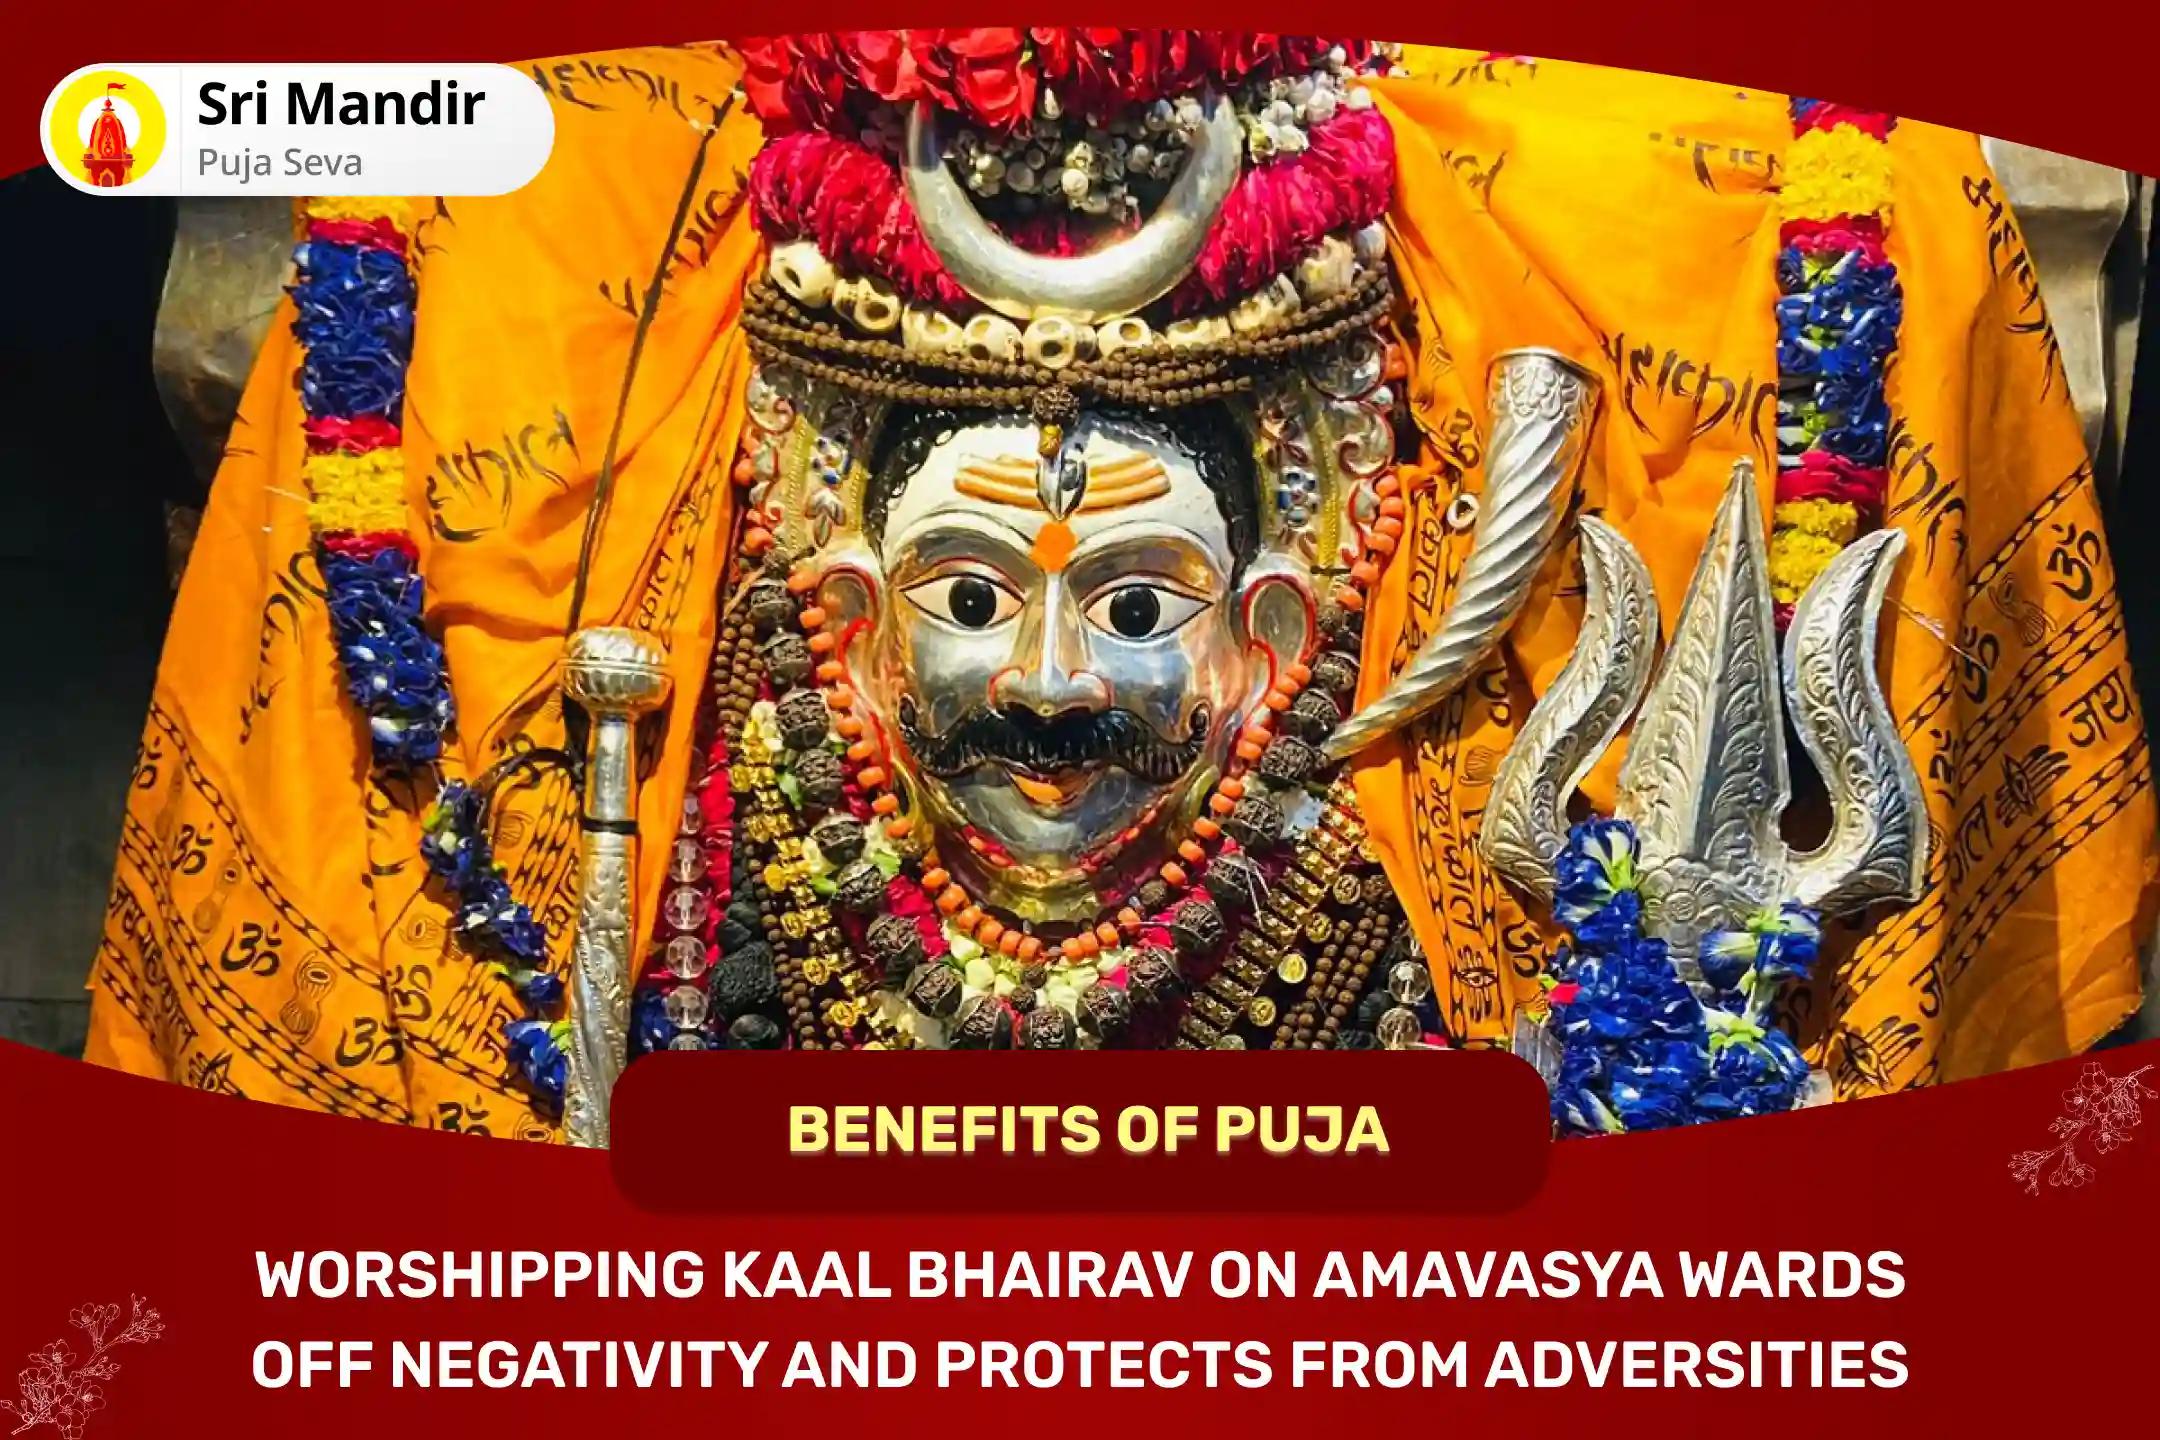 Amavasya Kashi Special Kaal Bhairav Stotra Path and Adikaal Bhairav Tantra Yukta Havan For protection from Negative Energies, Evil Forces and Adversities in Life